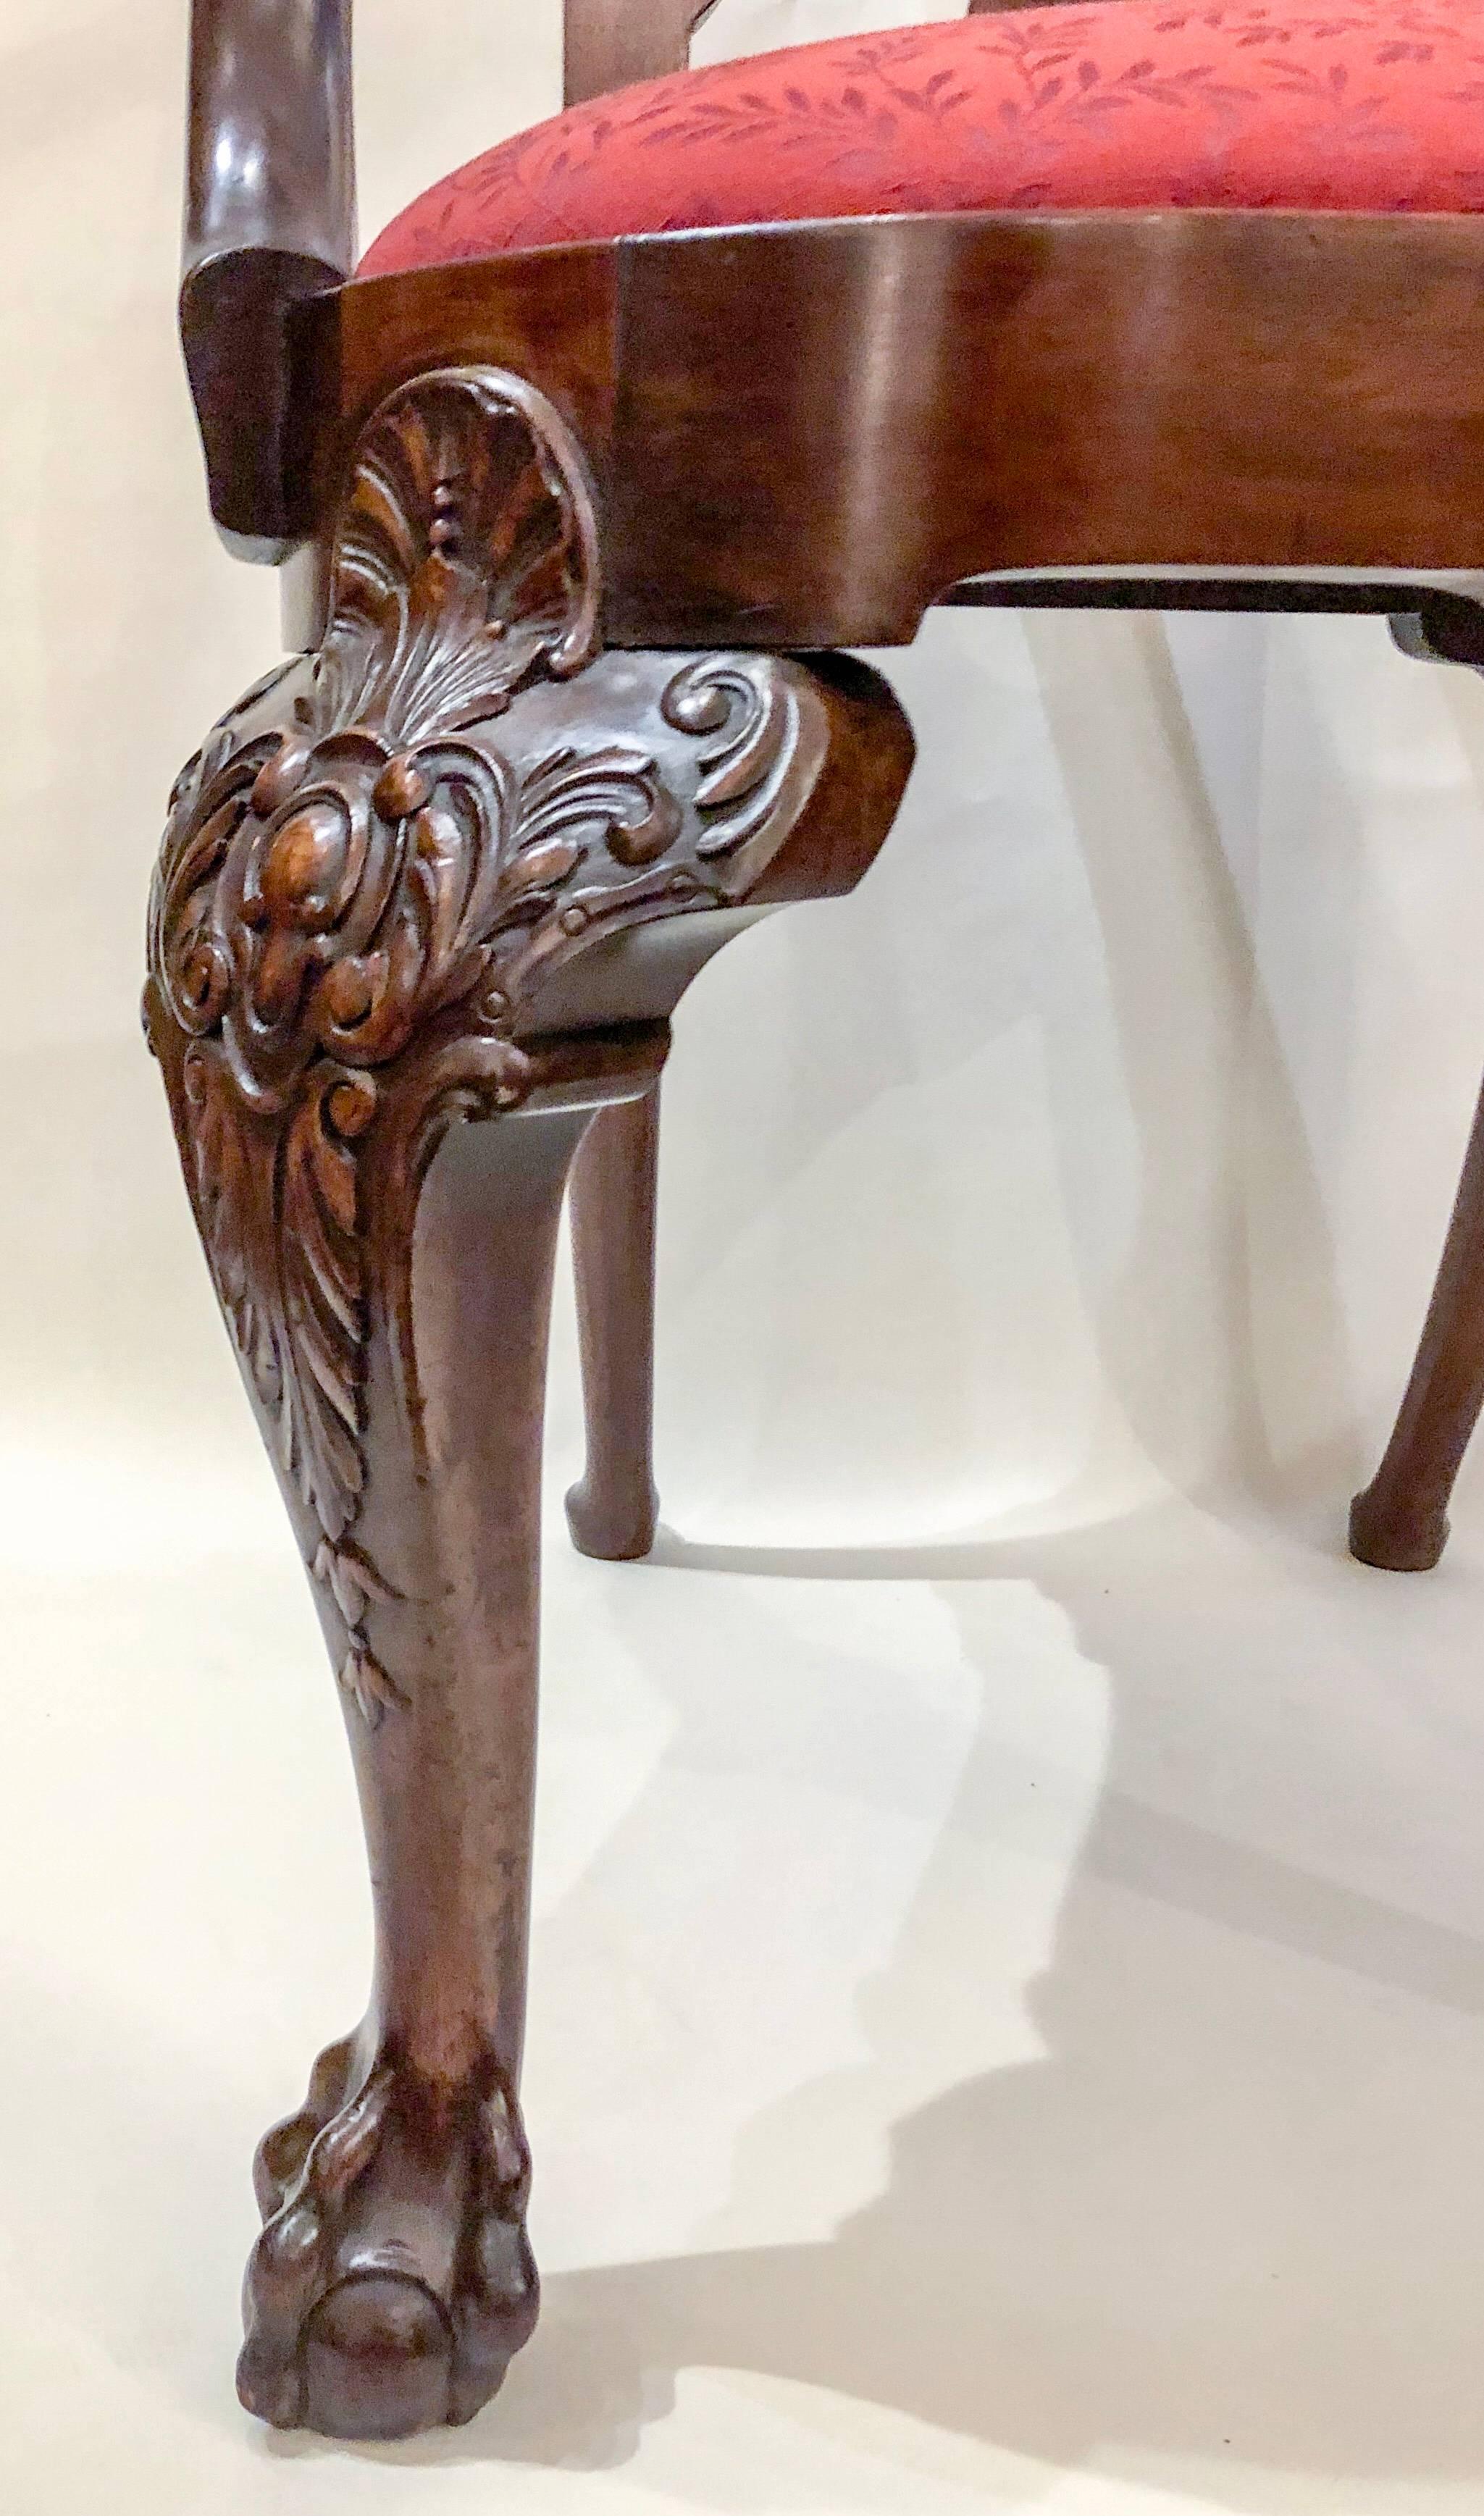 A nice pair of carved armchairs in the traditional style of English mid-19th century furnishings.
 